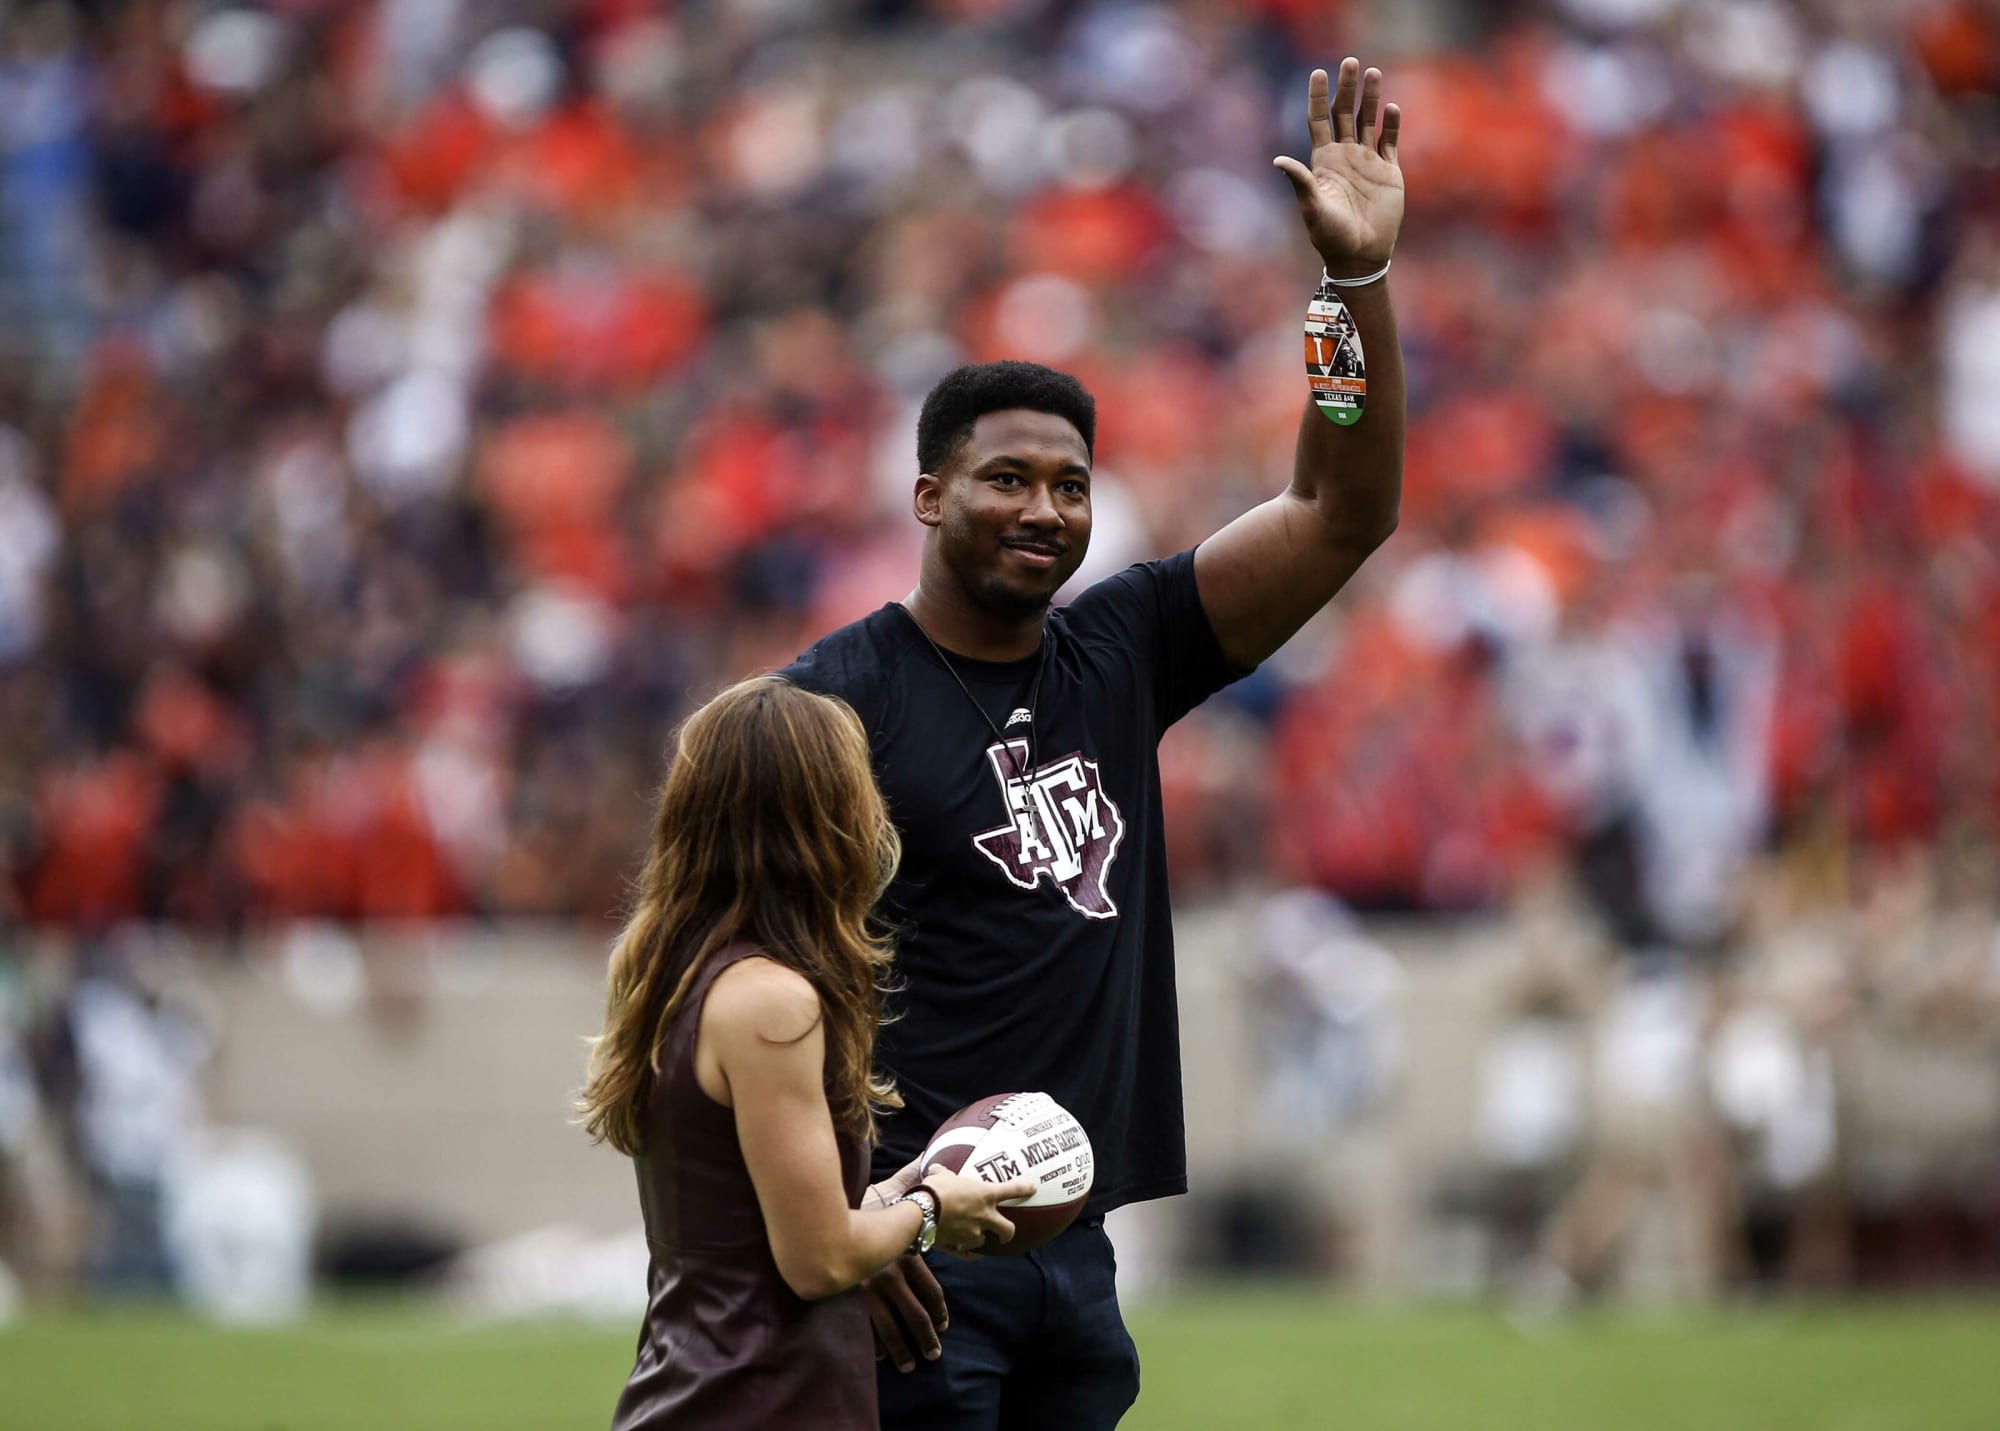  Texas A&M Football: NFL scout says Myles Garrett was “built out of a lab” 